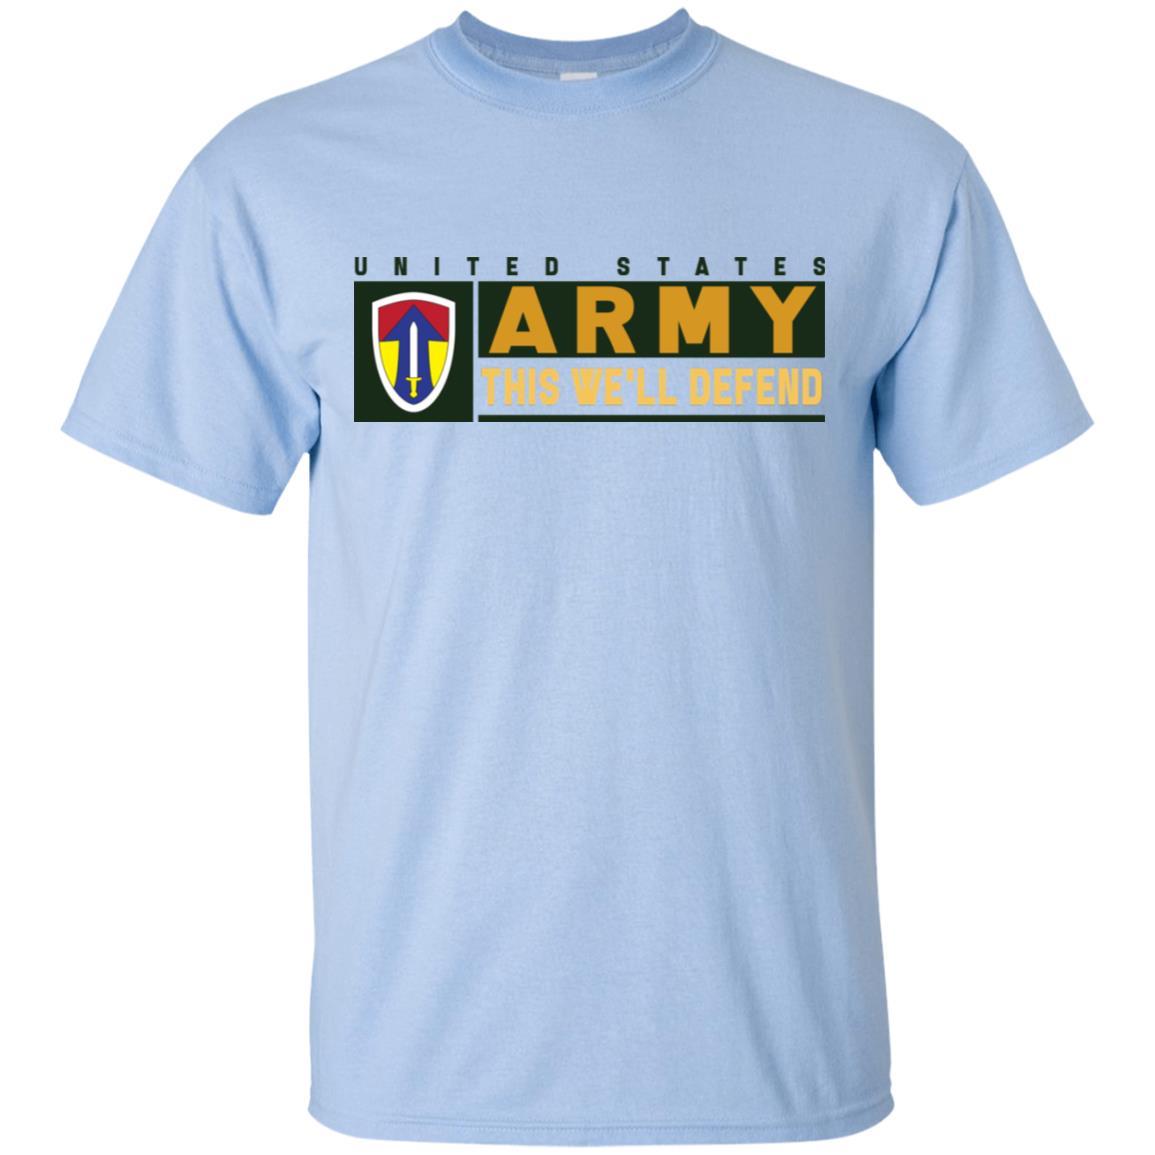 US Army 2 FIELD FORCE, VIETNAM- This We'll Defend T-Shirt On Front For Men-TShirt-Army-Veterans Nation